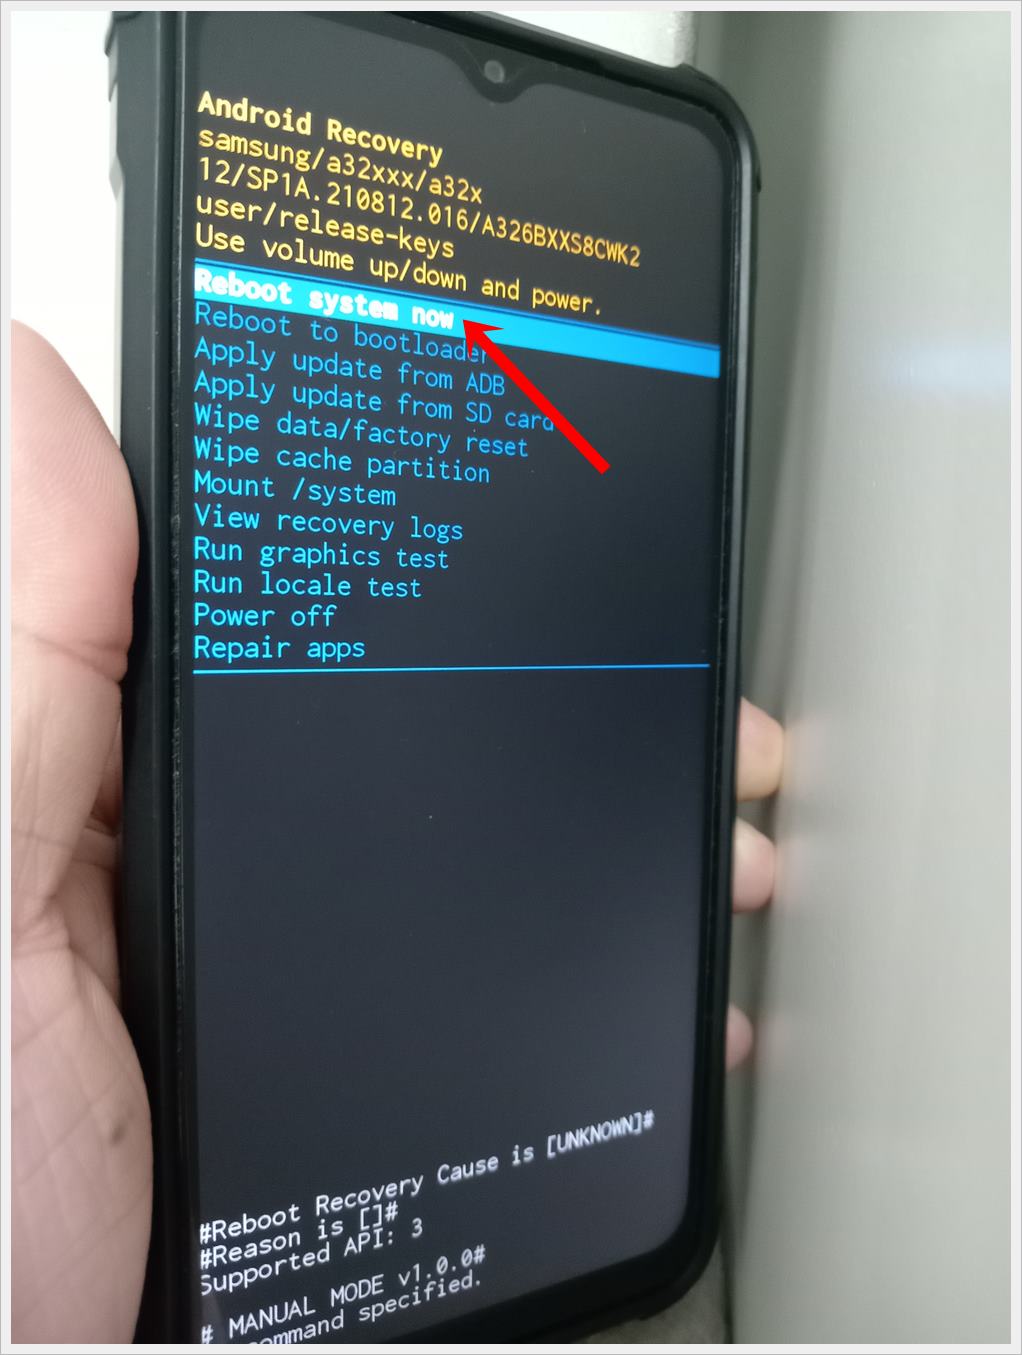 This photo shows an Android phone displaying the 'Android Recovery' screen with the 'Reboot System Now' option highlighted.